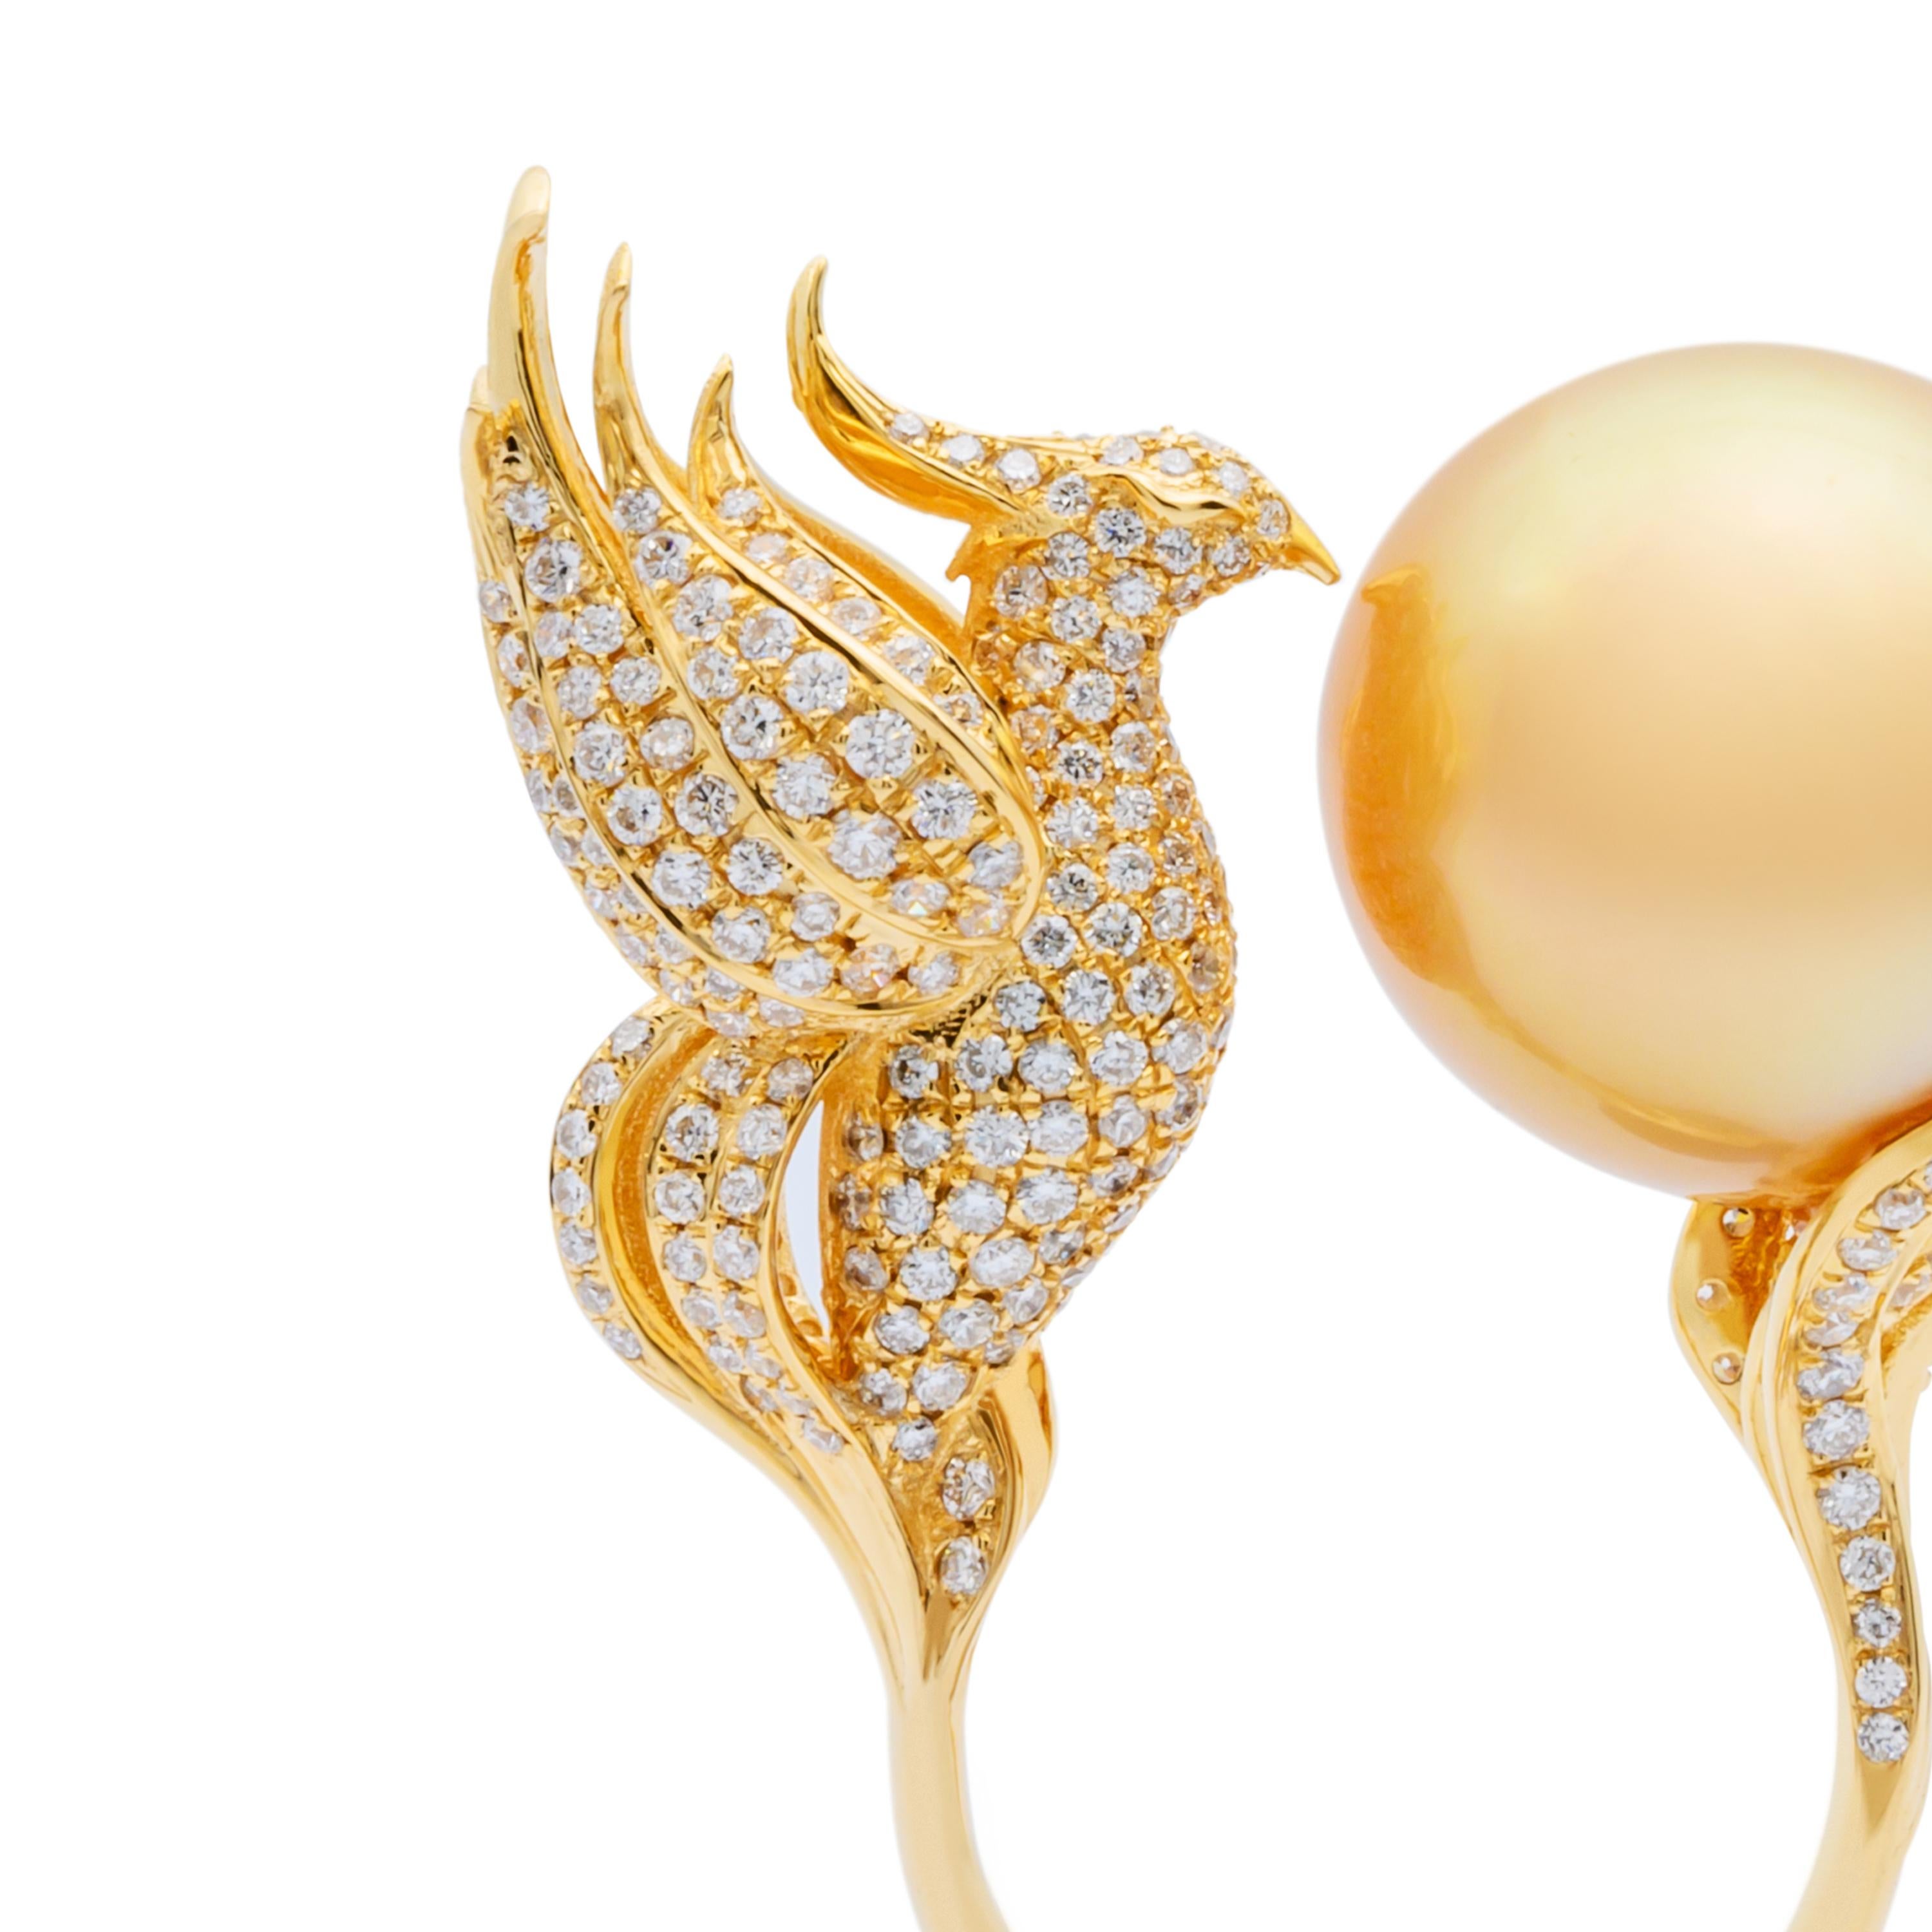 Collection: The Gem Made Me Do It

Title:  “The Golden Phoenix” Ring

Award Winning Design: 1st Prize, Creative Category, International Jewellery Stars 2019

This blemish free Golden South Sea Pearl wanted to dance with a Phoenix – a bird of power